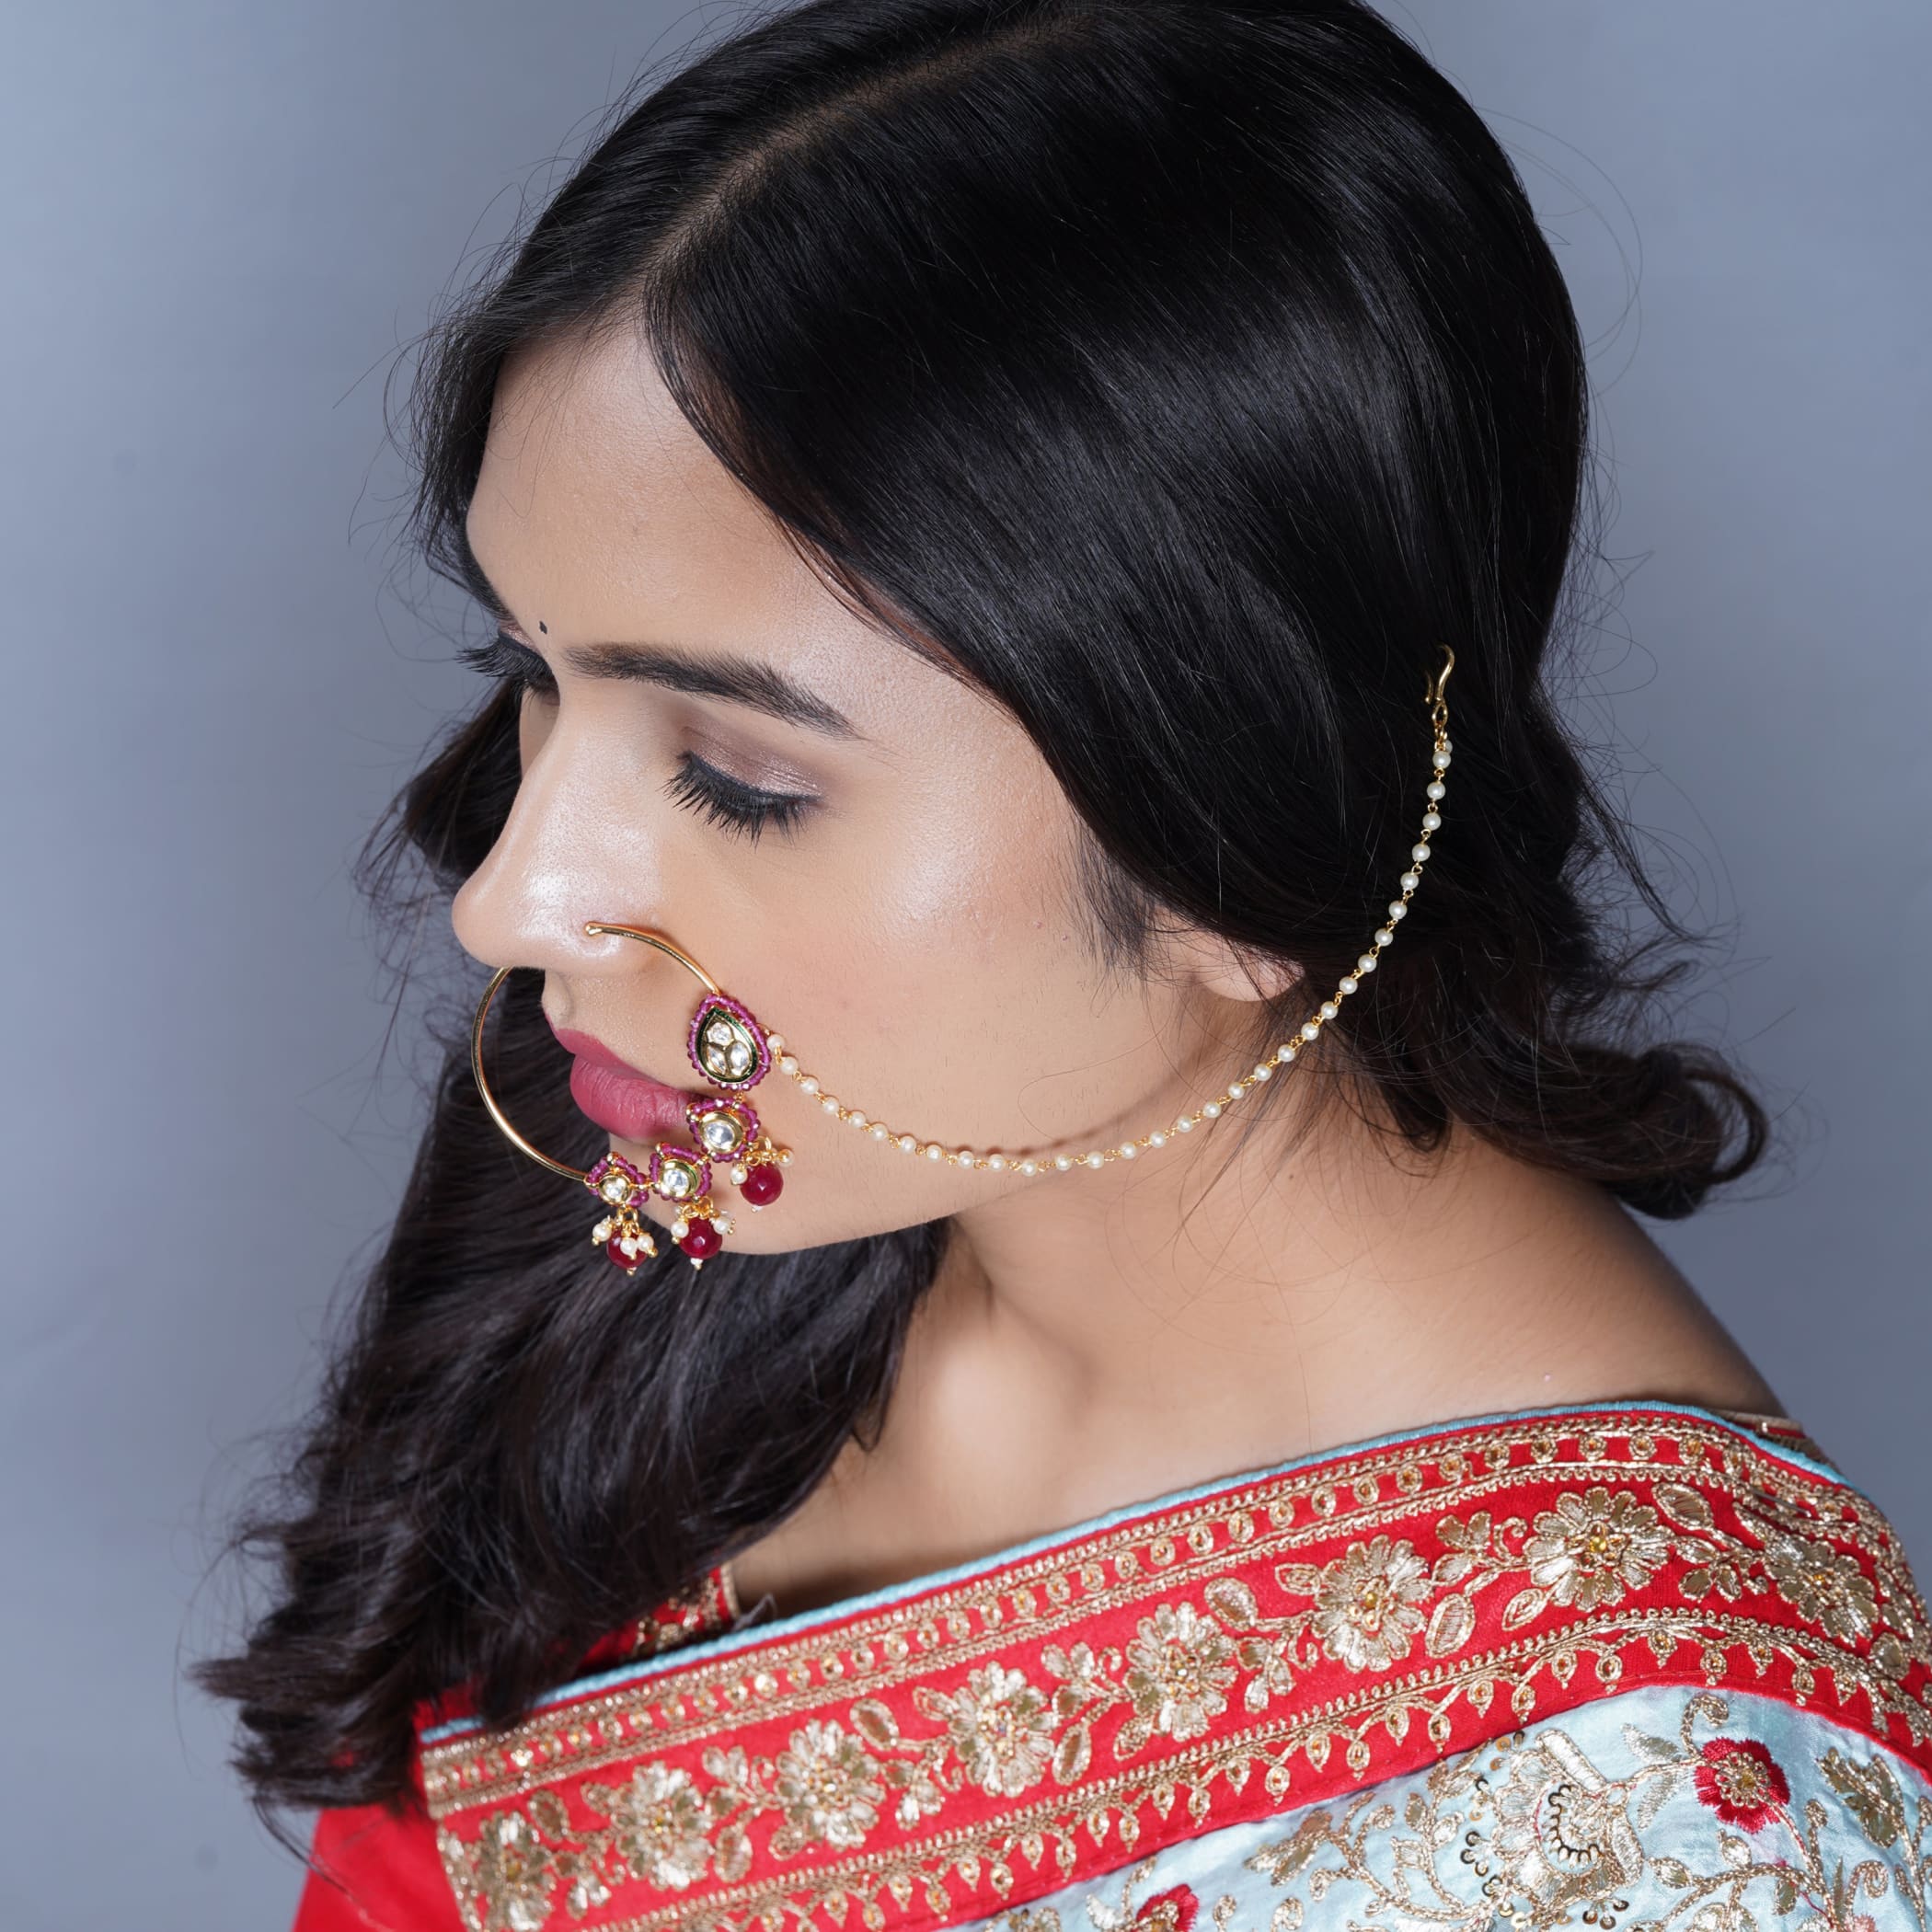 Buy The Clara Gold Plated Traditional Dulhan Nath,Nose Ring For Women &  Girls | Wedding Nose Ring, Pin | Nathiya | Pressing Nath For Bridal at  Amazon.in